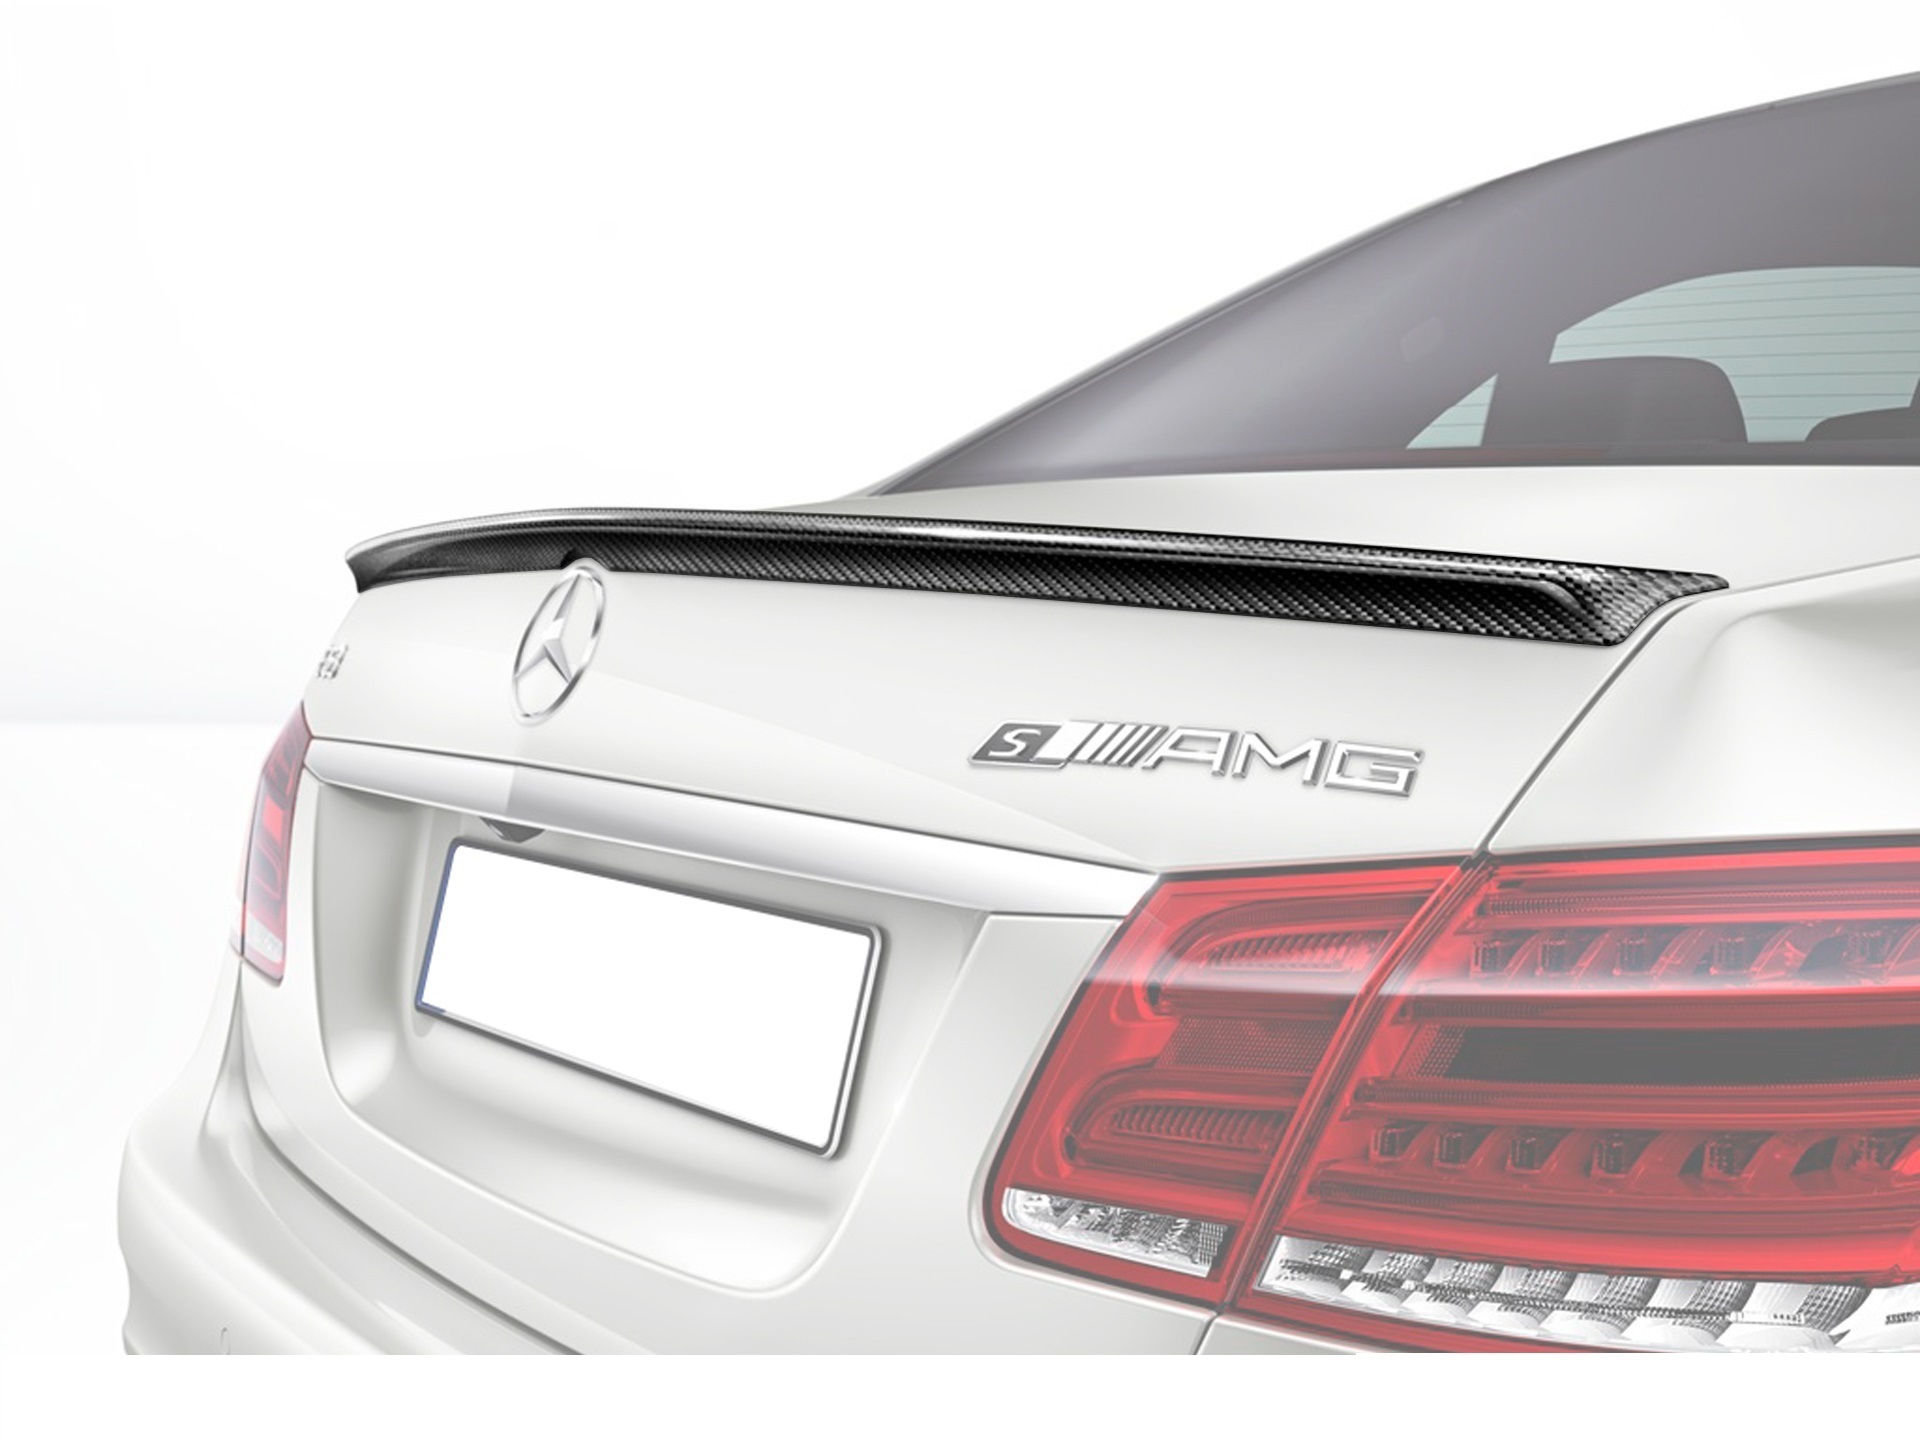 Hodoor Performance Carbon fiber trunk spoiler 63 AMG Style for Mercedes E-class W212